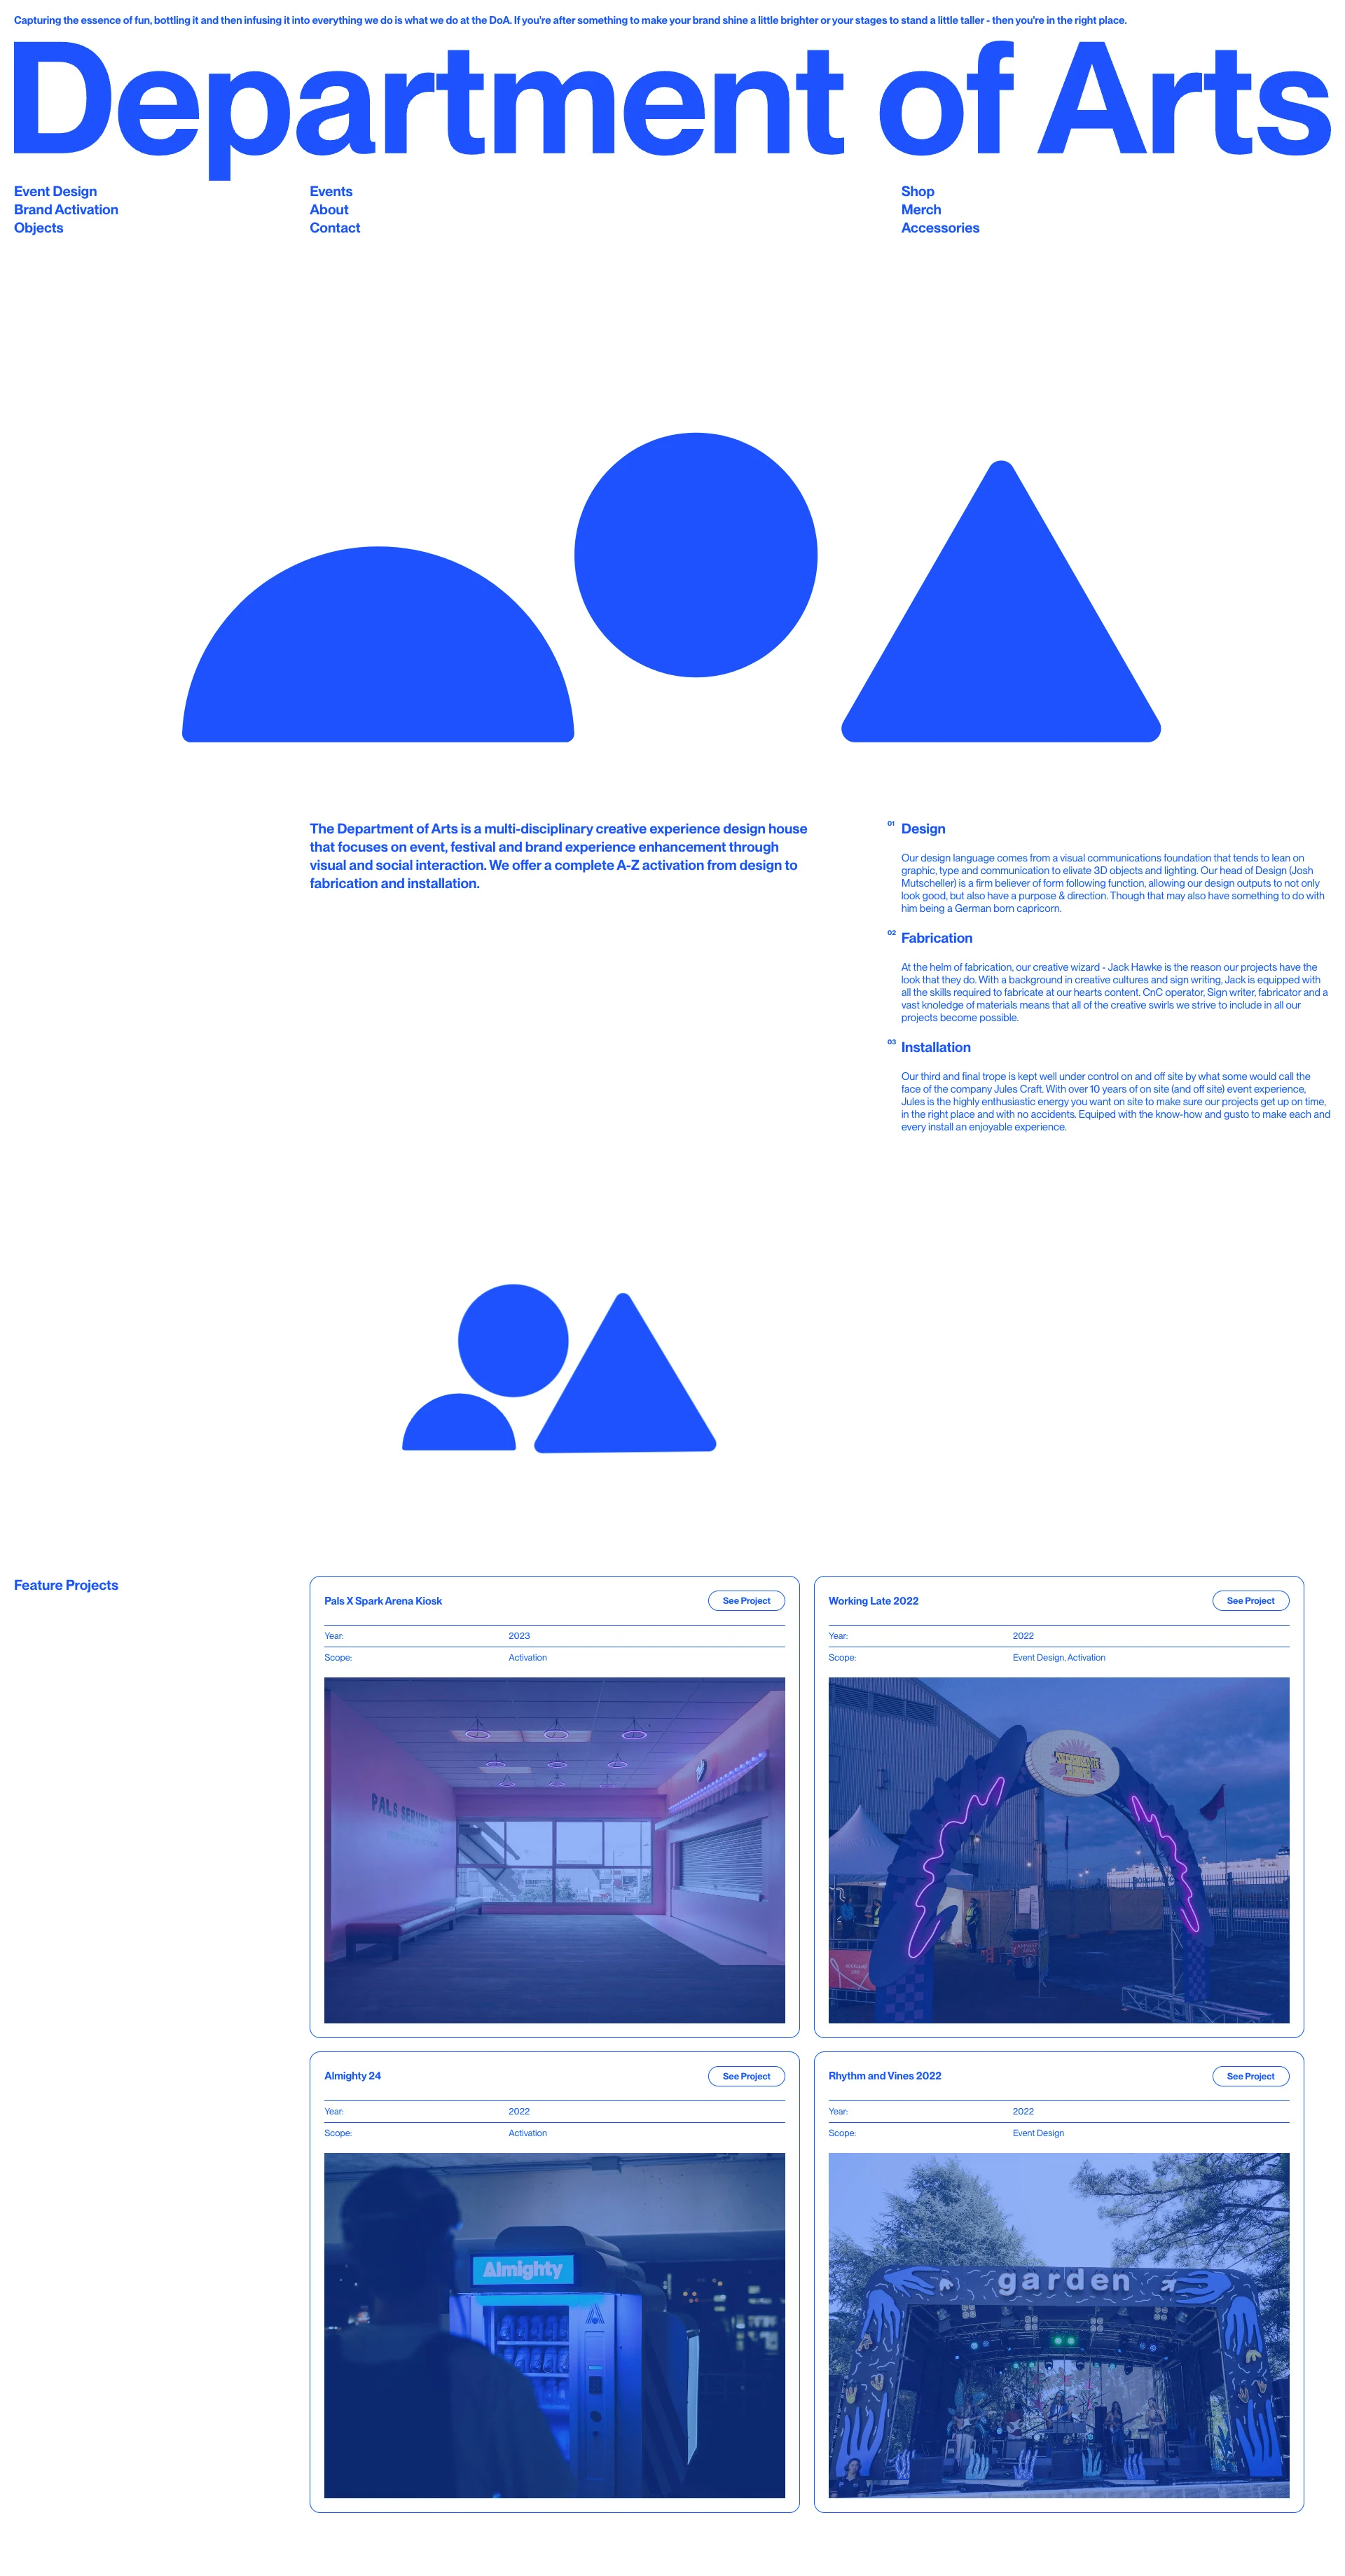 DoA Landing Page Example: A multi-disciplinary creative experience design house that focuses on event, festival and brand experience enhancement through visual and social interaction.